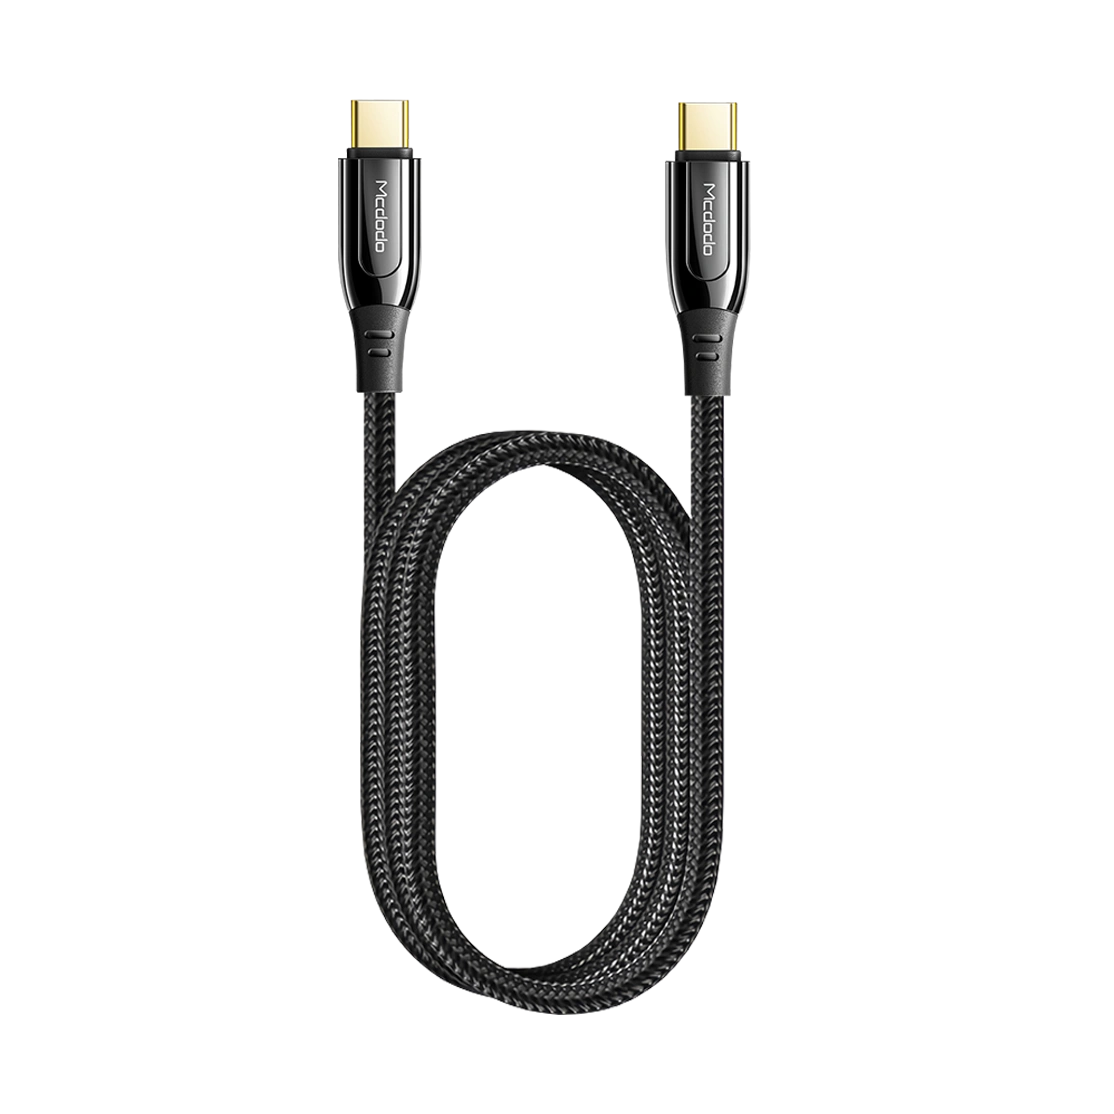 Mcdodo Fast Charger USB-C Cable 2m CA-8123